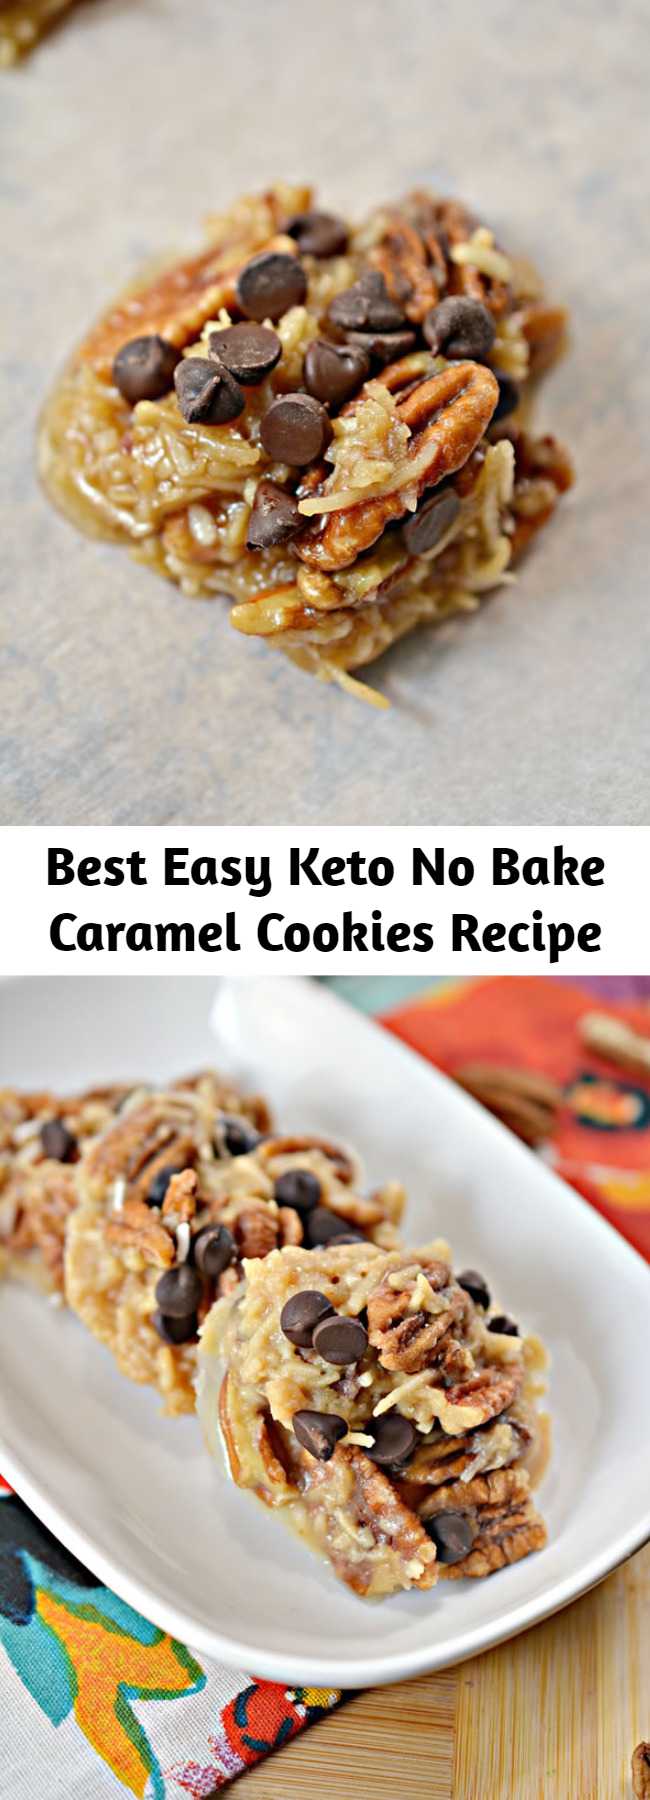 Best Easy Keto No Bake Caramel Cookies Recipe - Tasty keto NO bake cookies you CAN NOT stop eating! Super delicious keto caramel cookies. These low carb cookies are easy to make and super yummy. You can put these cookies together in a 5 minutes. #keto